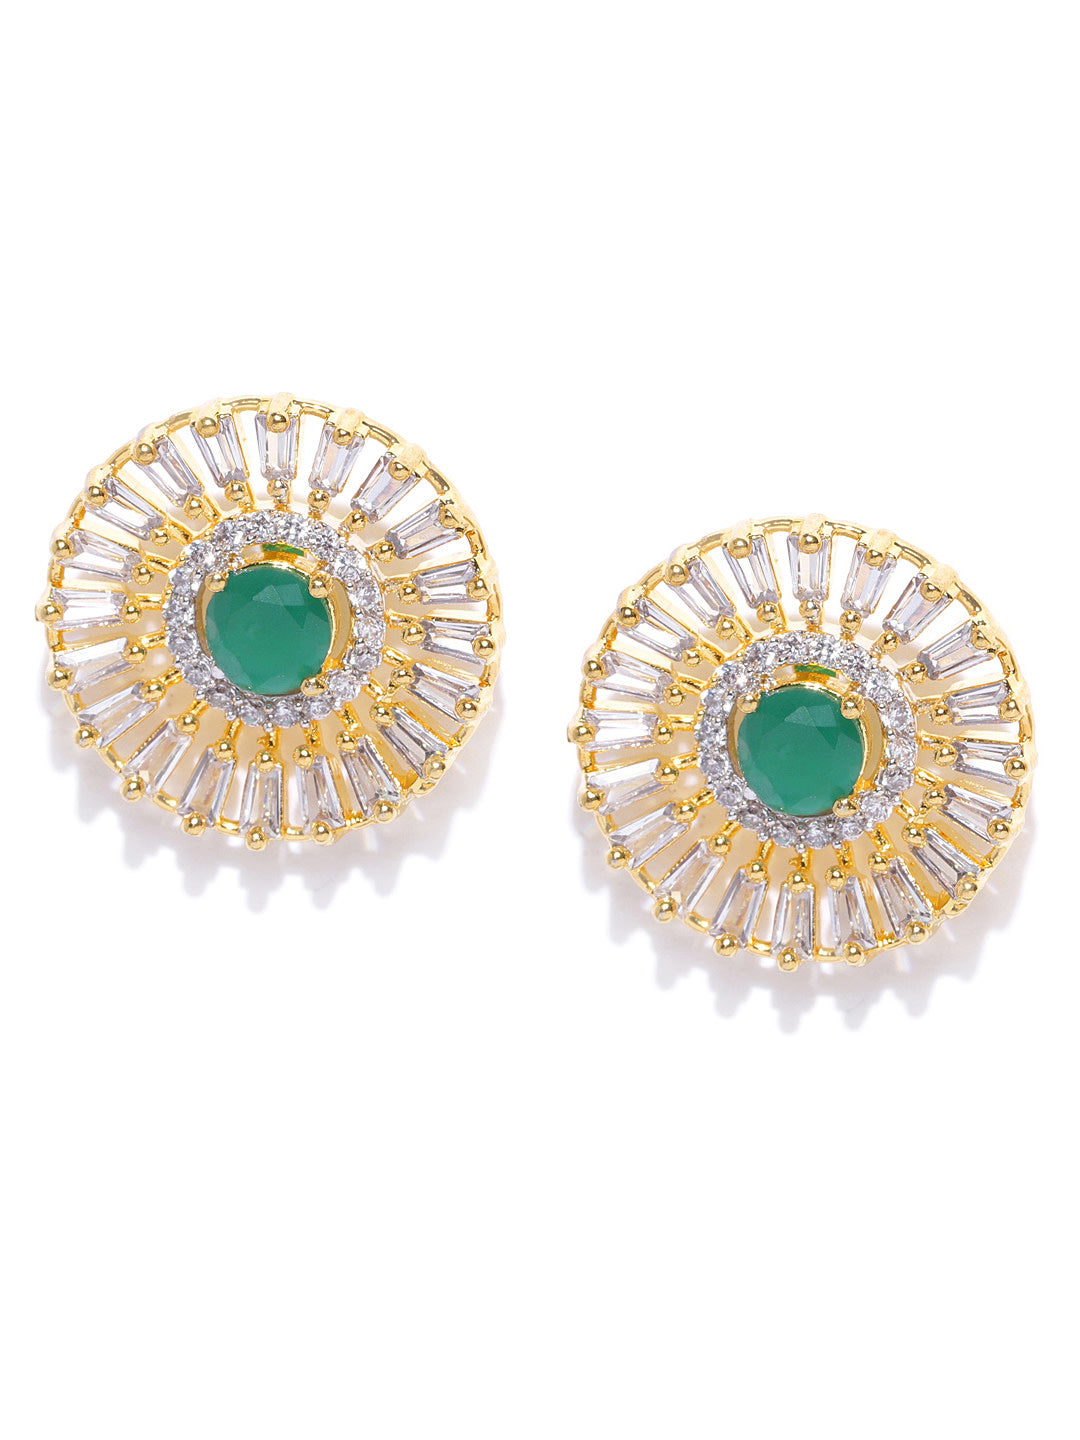 Gold-Plated American Diamond and Emerald Studded Stud Earrings